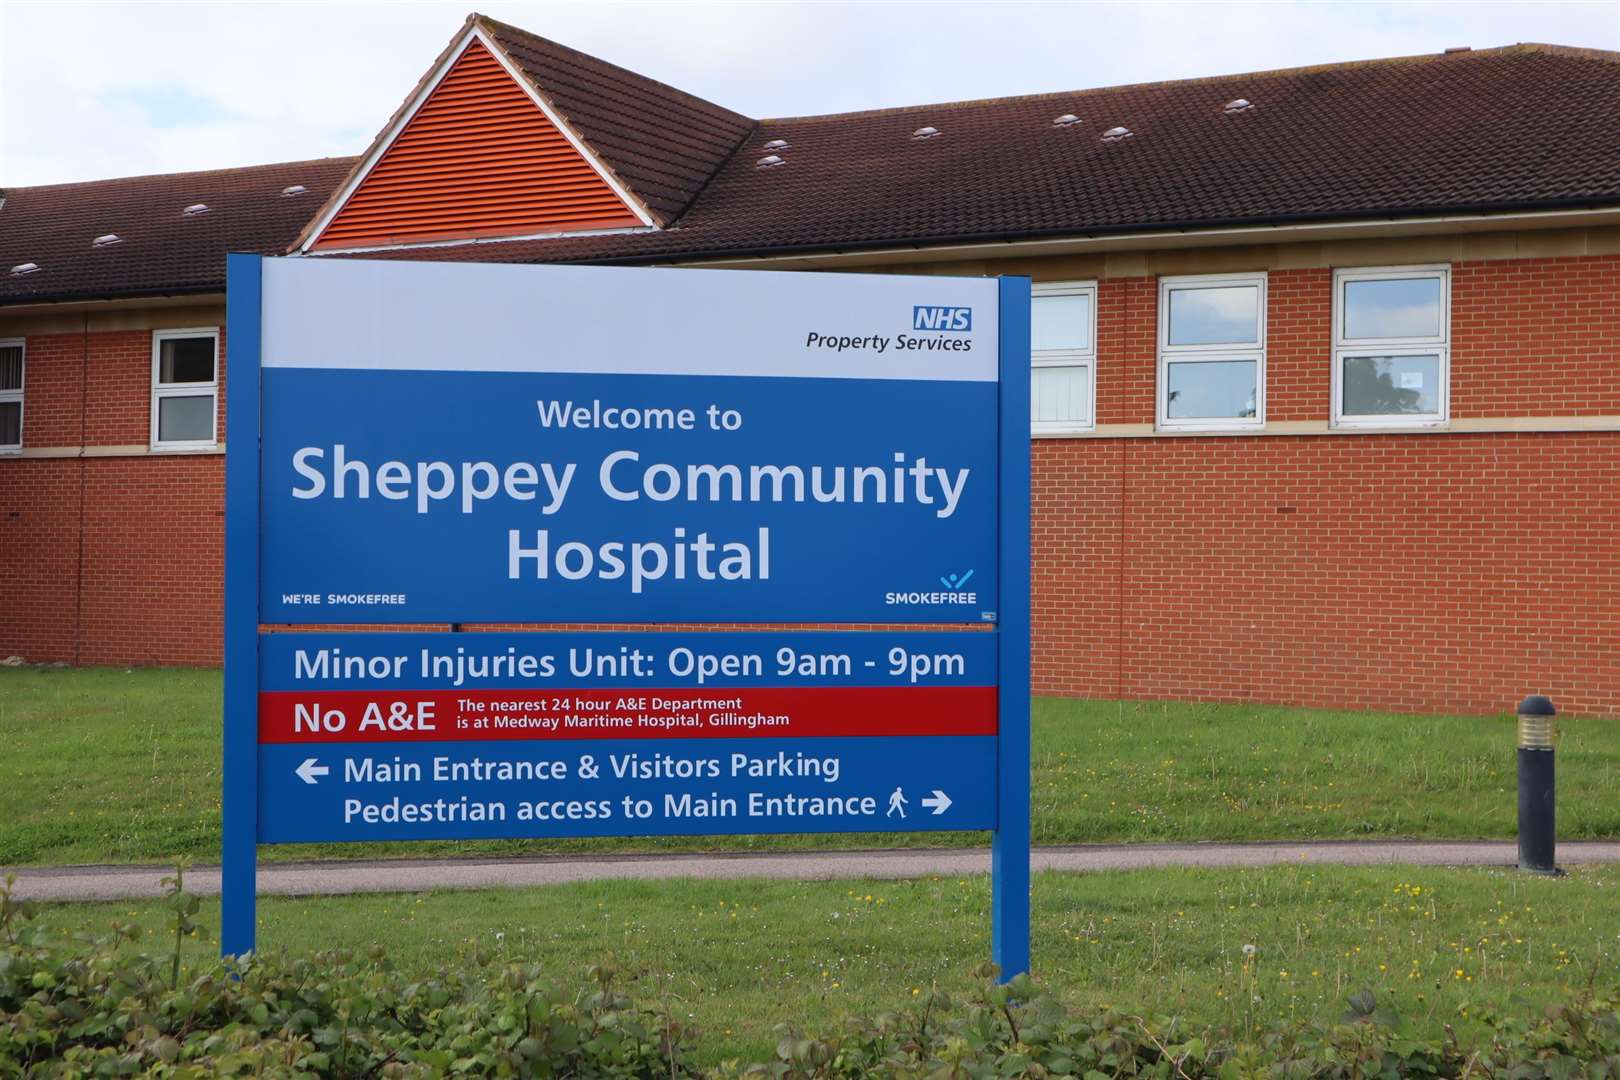 Wards of Sheppey Community Hospital were run by Virgin Care